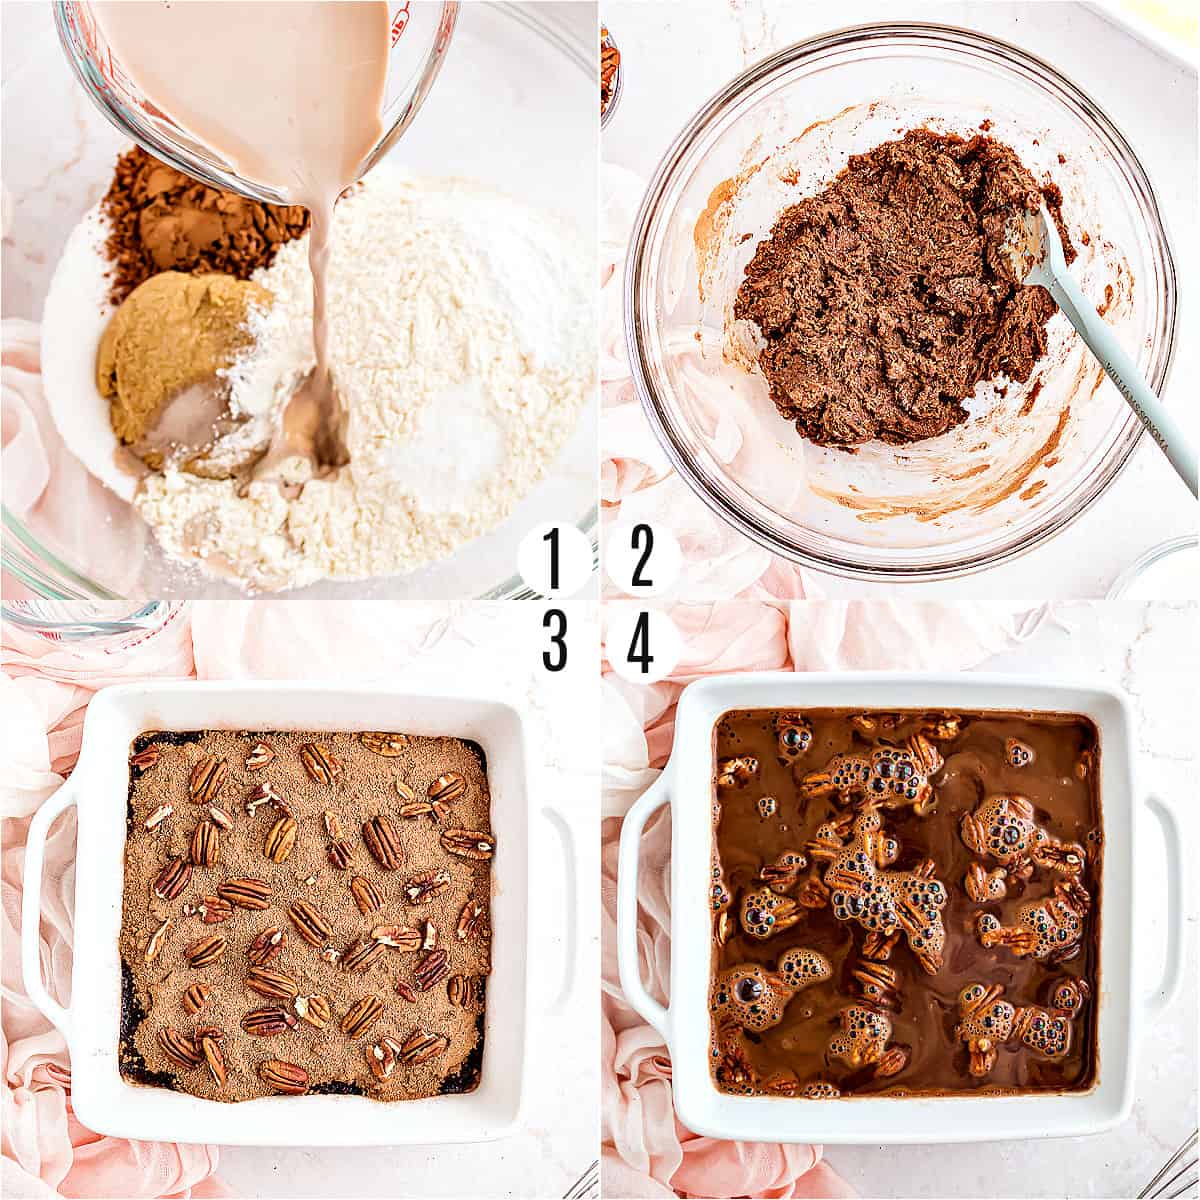 Step by step photos showing how to make chocolate cobbler.